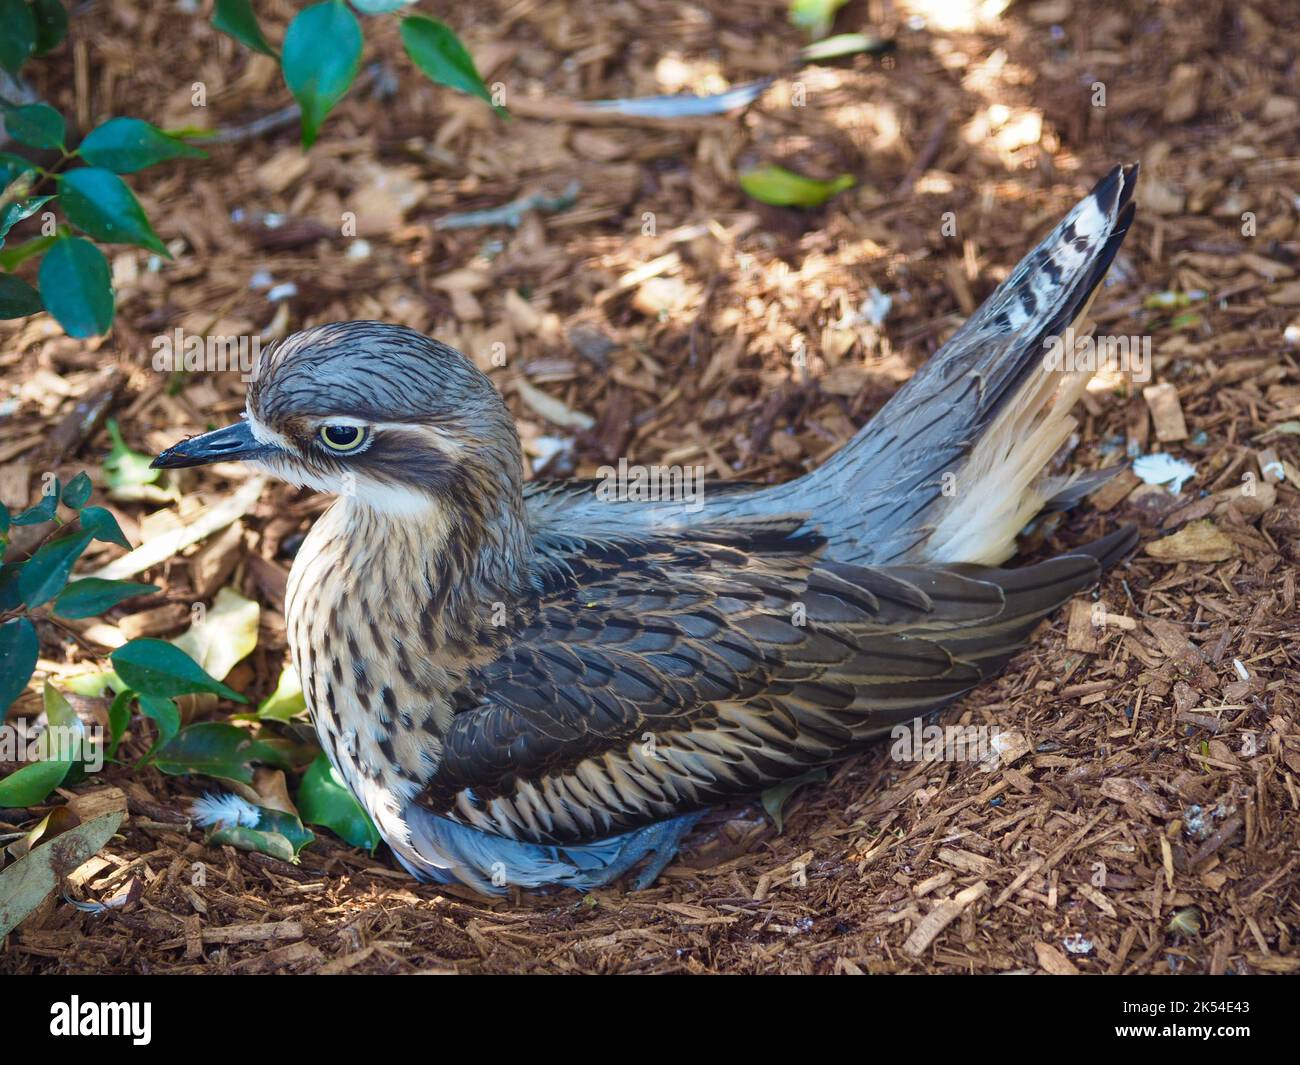 Shy apprehensive Bush Stone-Curlew camouflaged against a natural background. Stock Photo